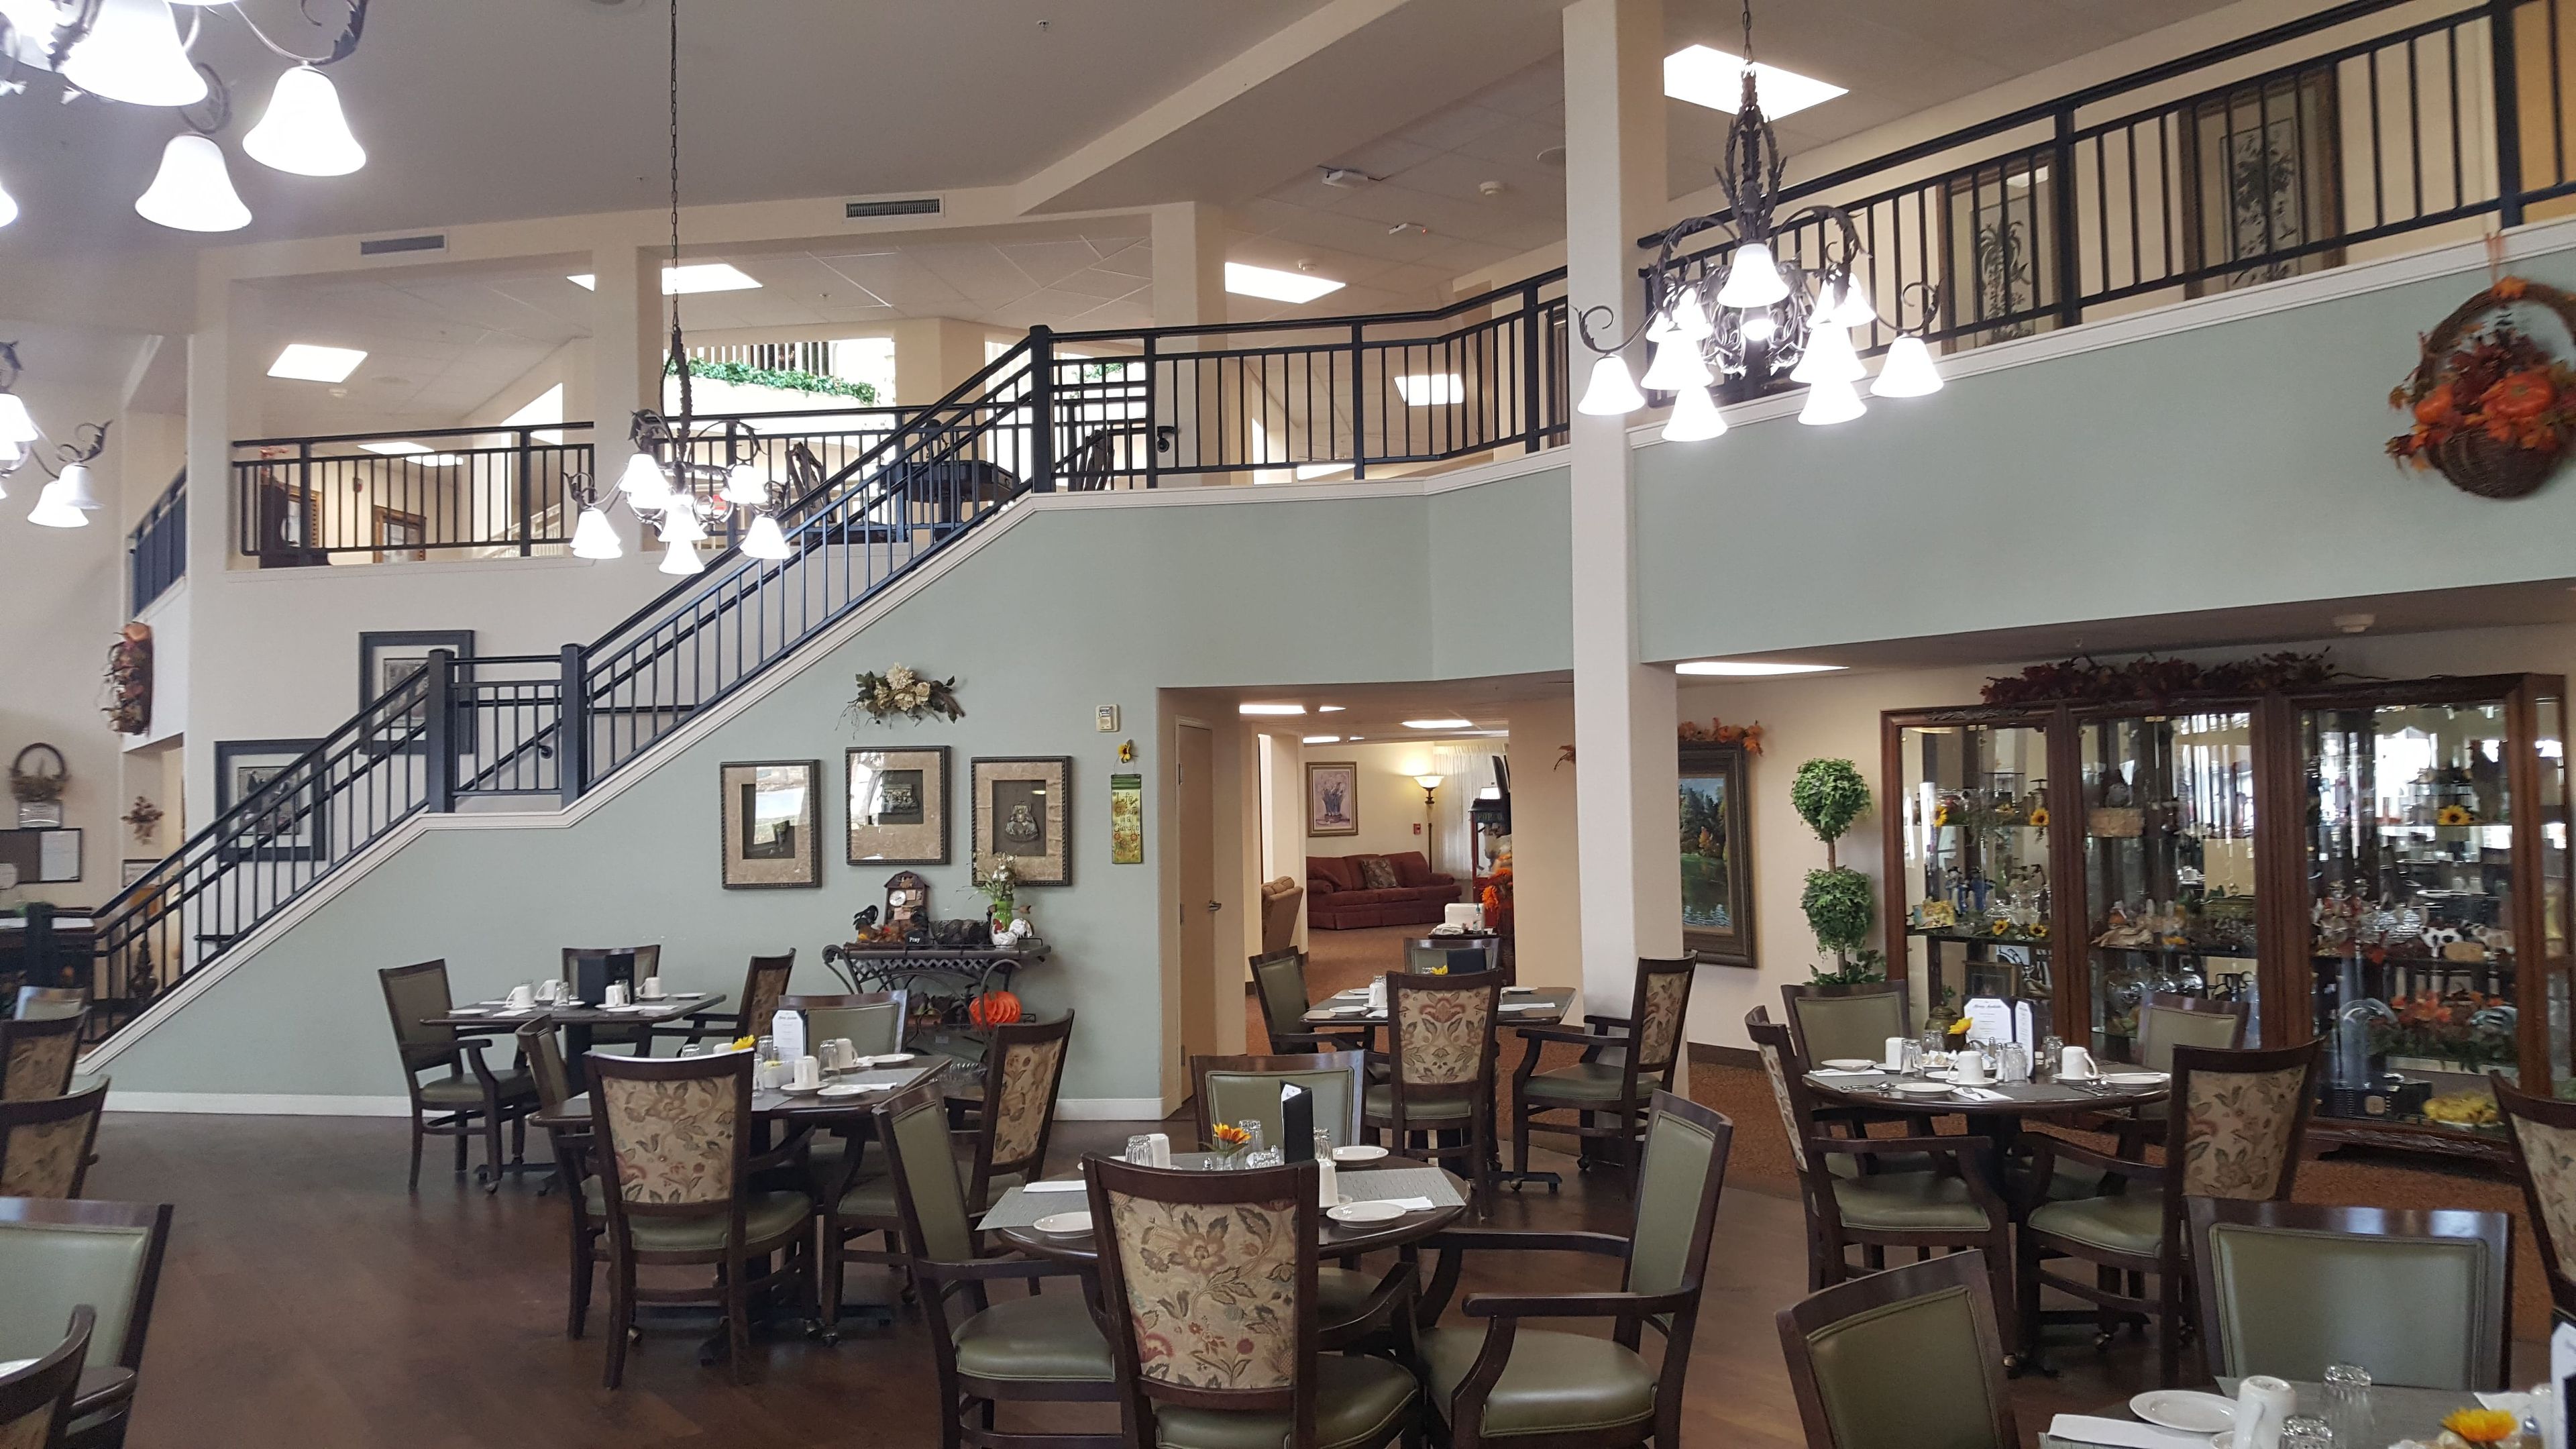 Interior view of Solstice Senior Living At Lees Summit featuring dining area, art, and decor.